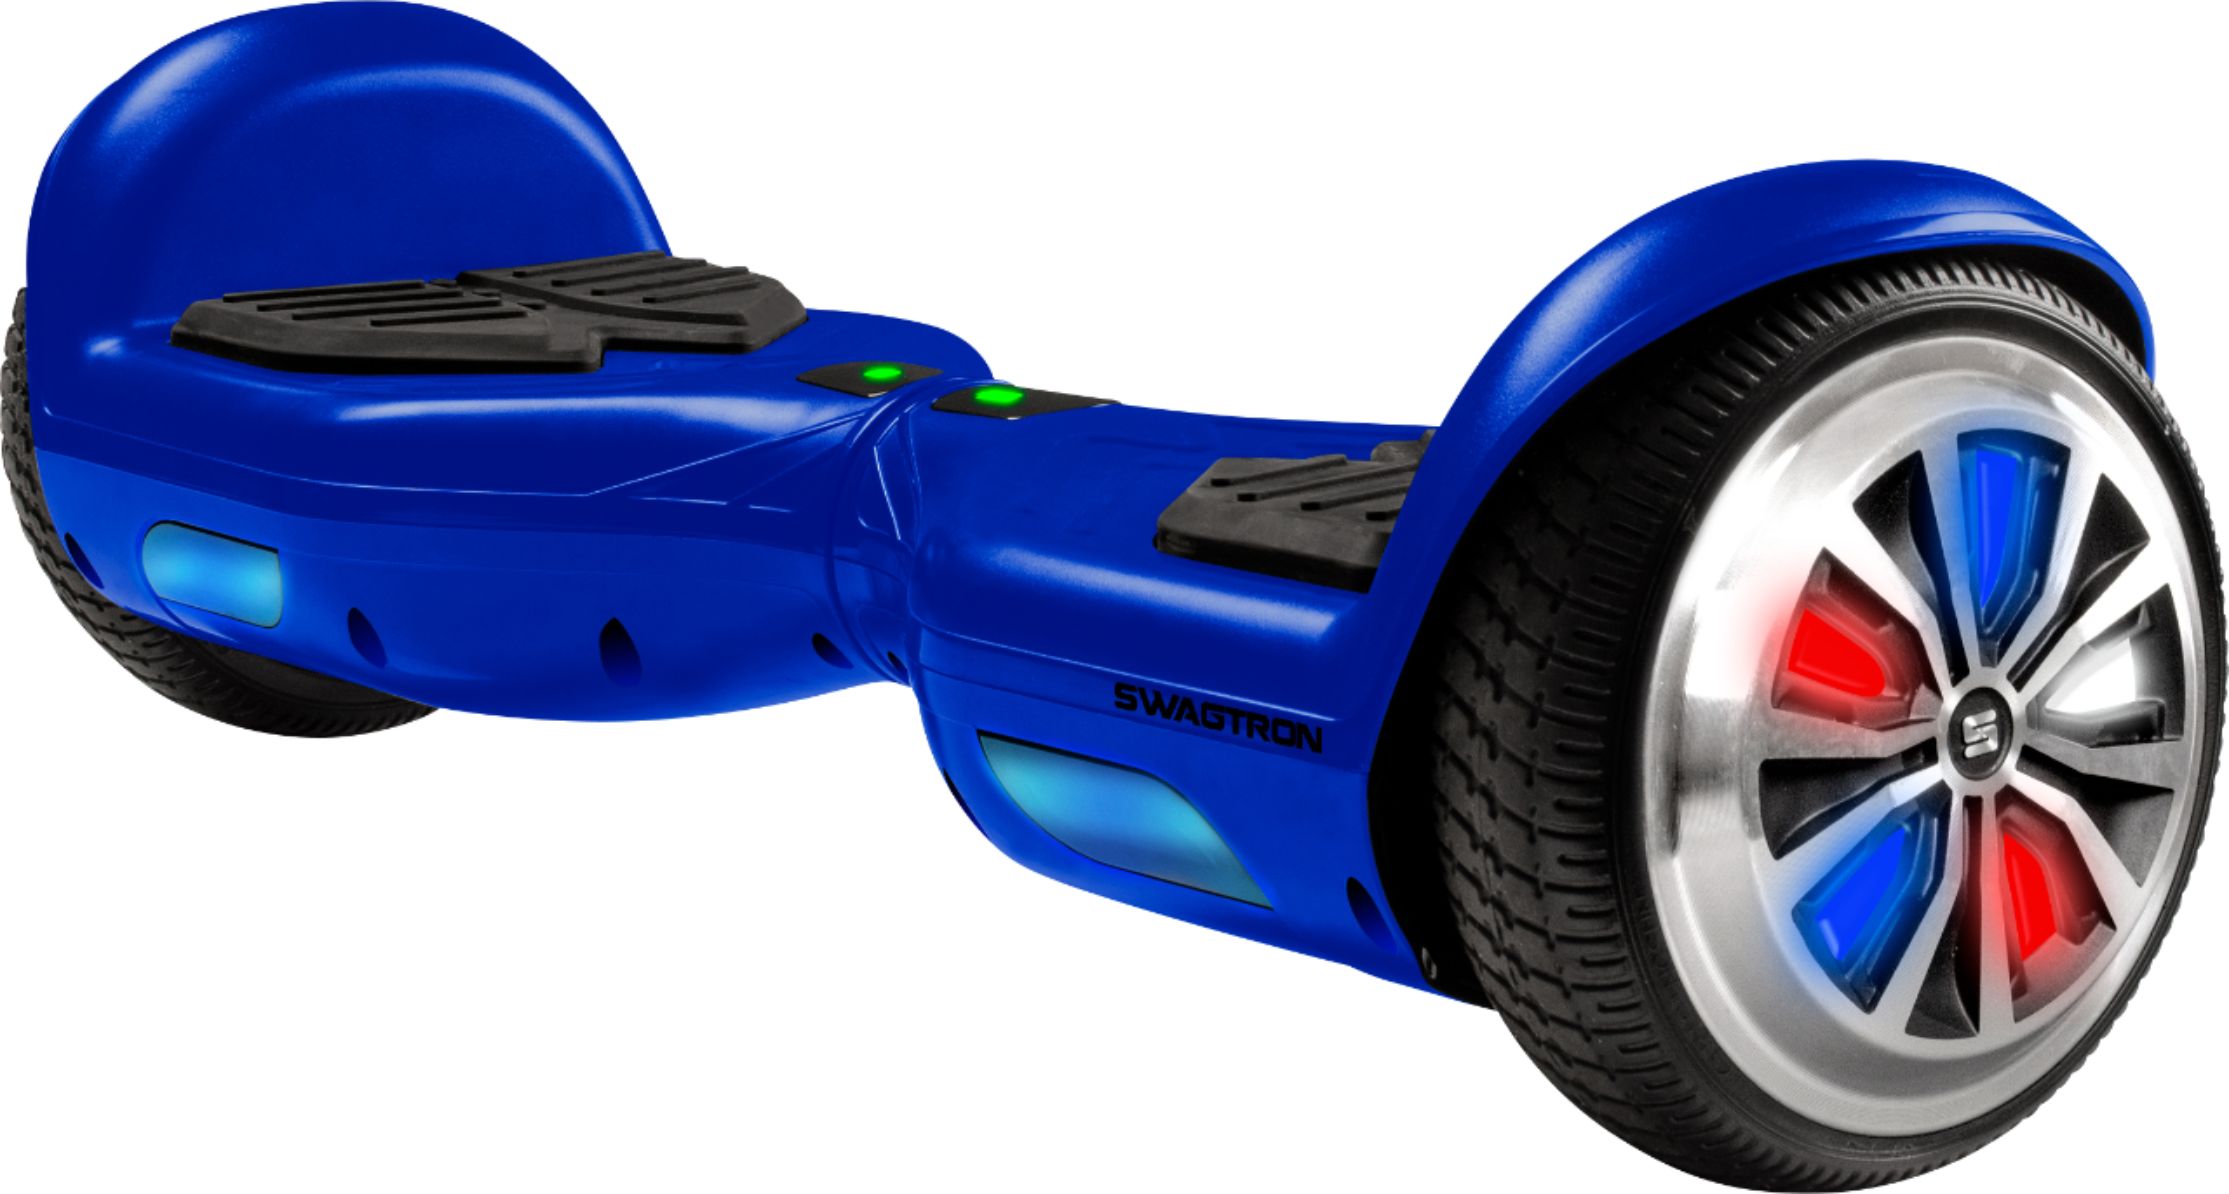 Left View: Swagtron - T882 Electric Self-Balancing Scooter w/4.8 mi Max Operating Range & 6.8 mph Max Speed - Blue